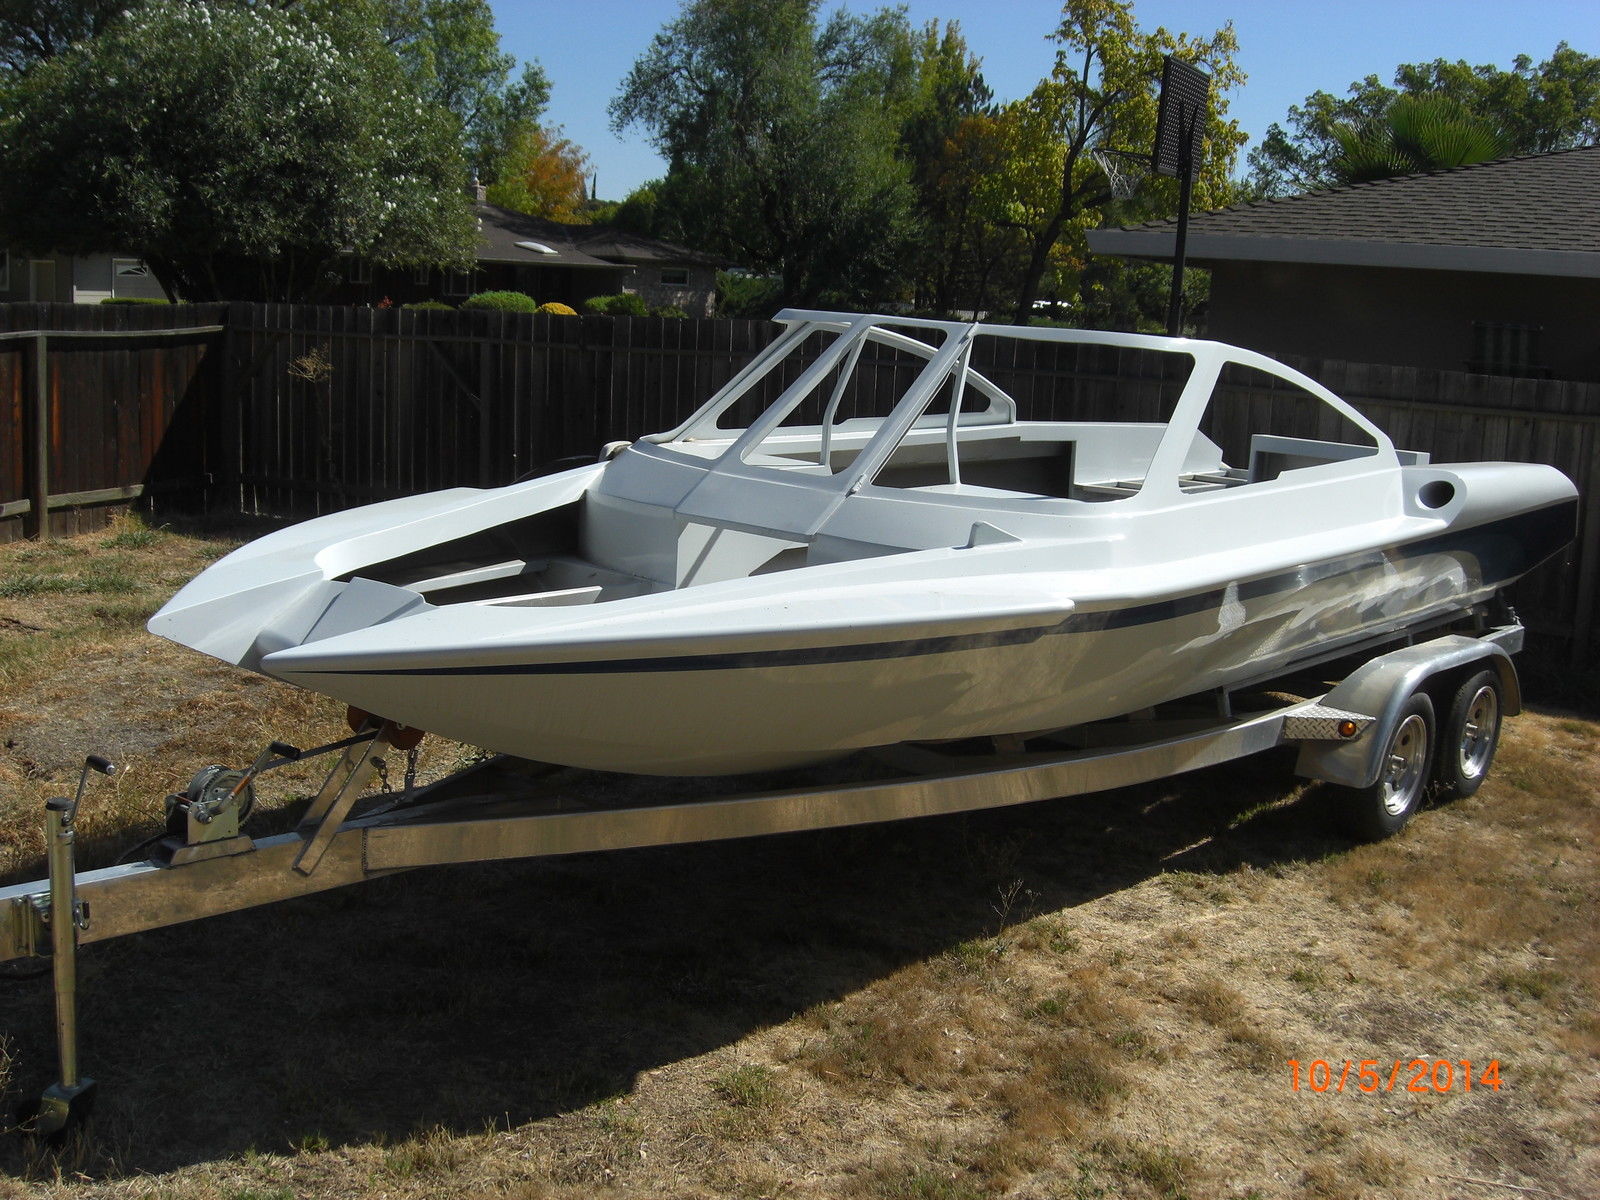 24' Boice Jet Boat boat for sale from USA